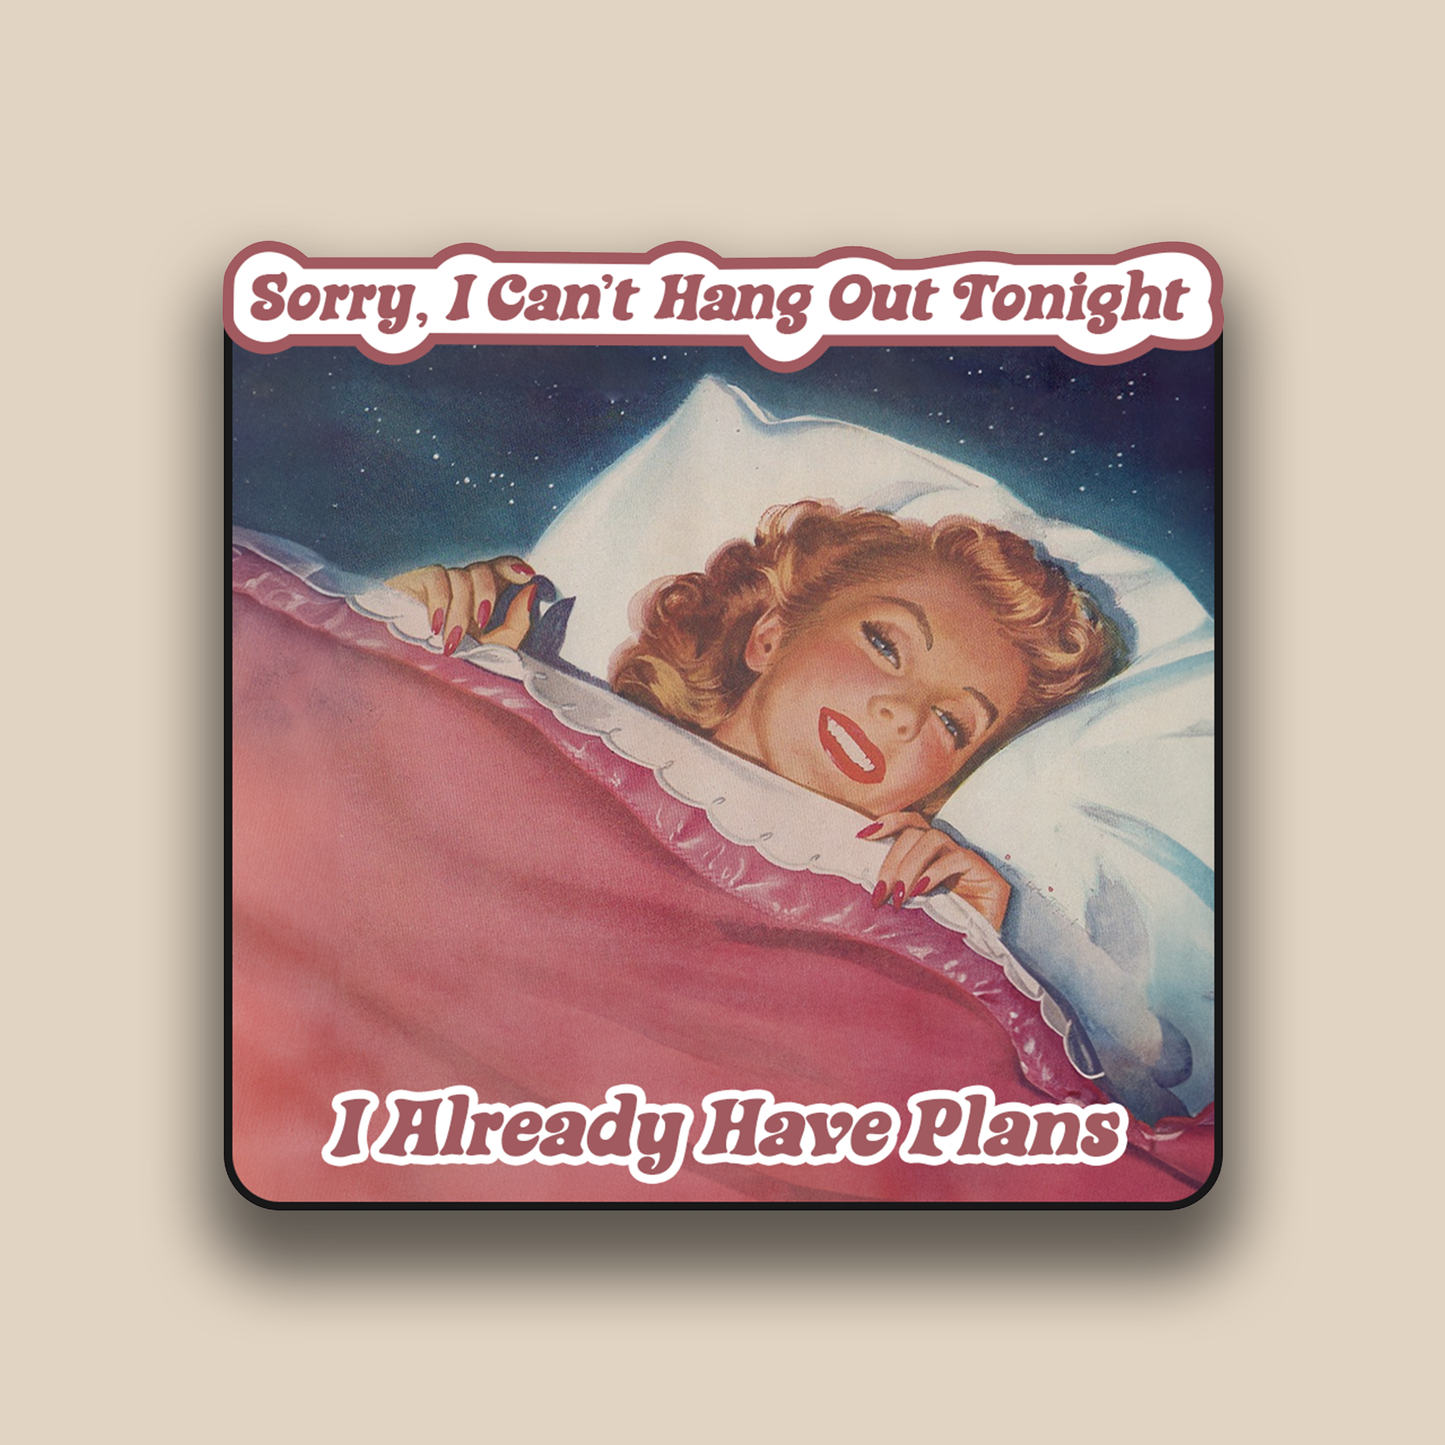 Sorry, I Can't Hang- Sticker